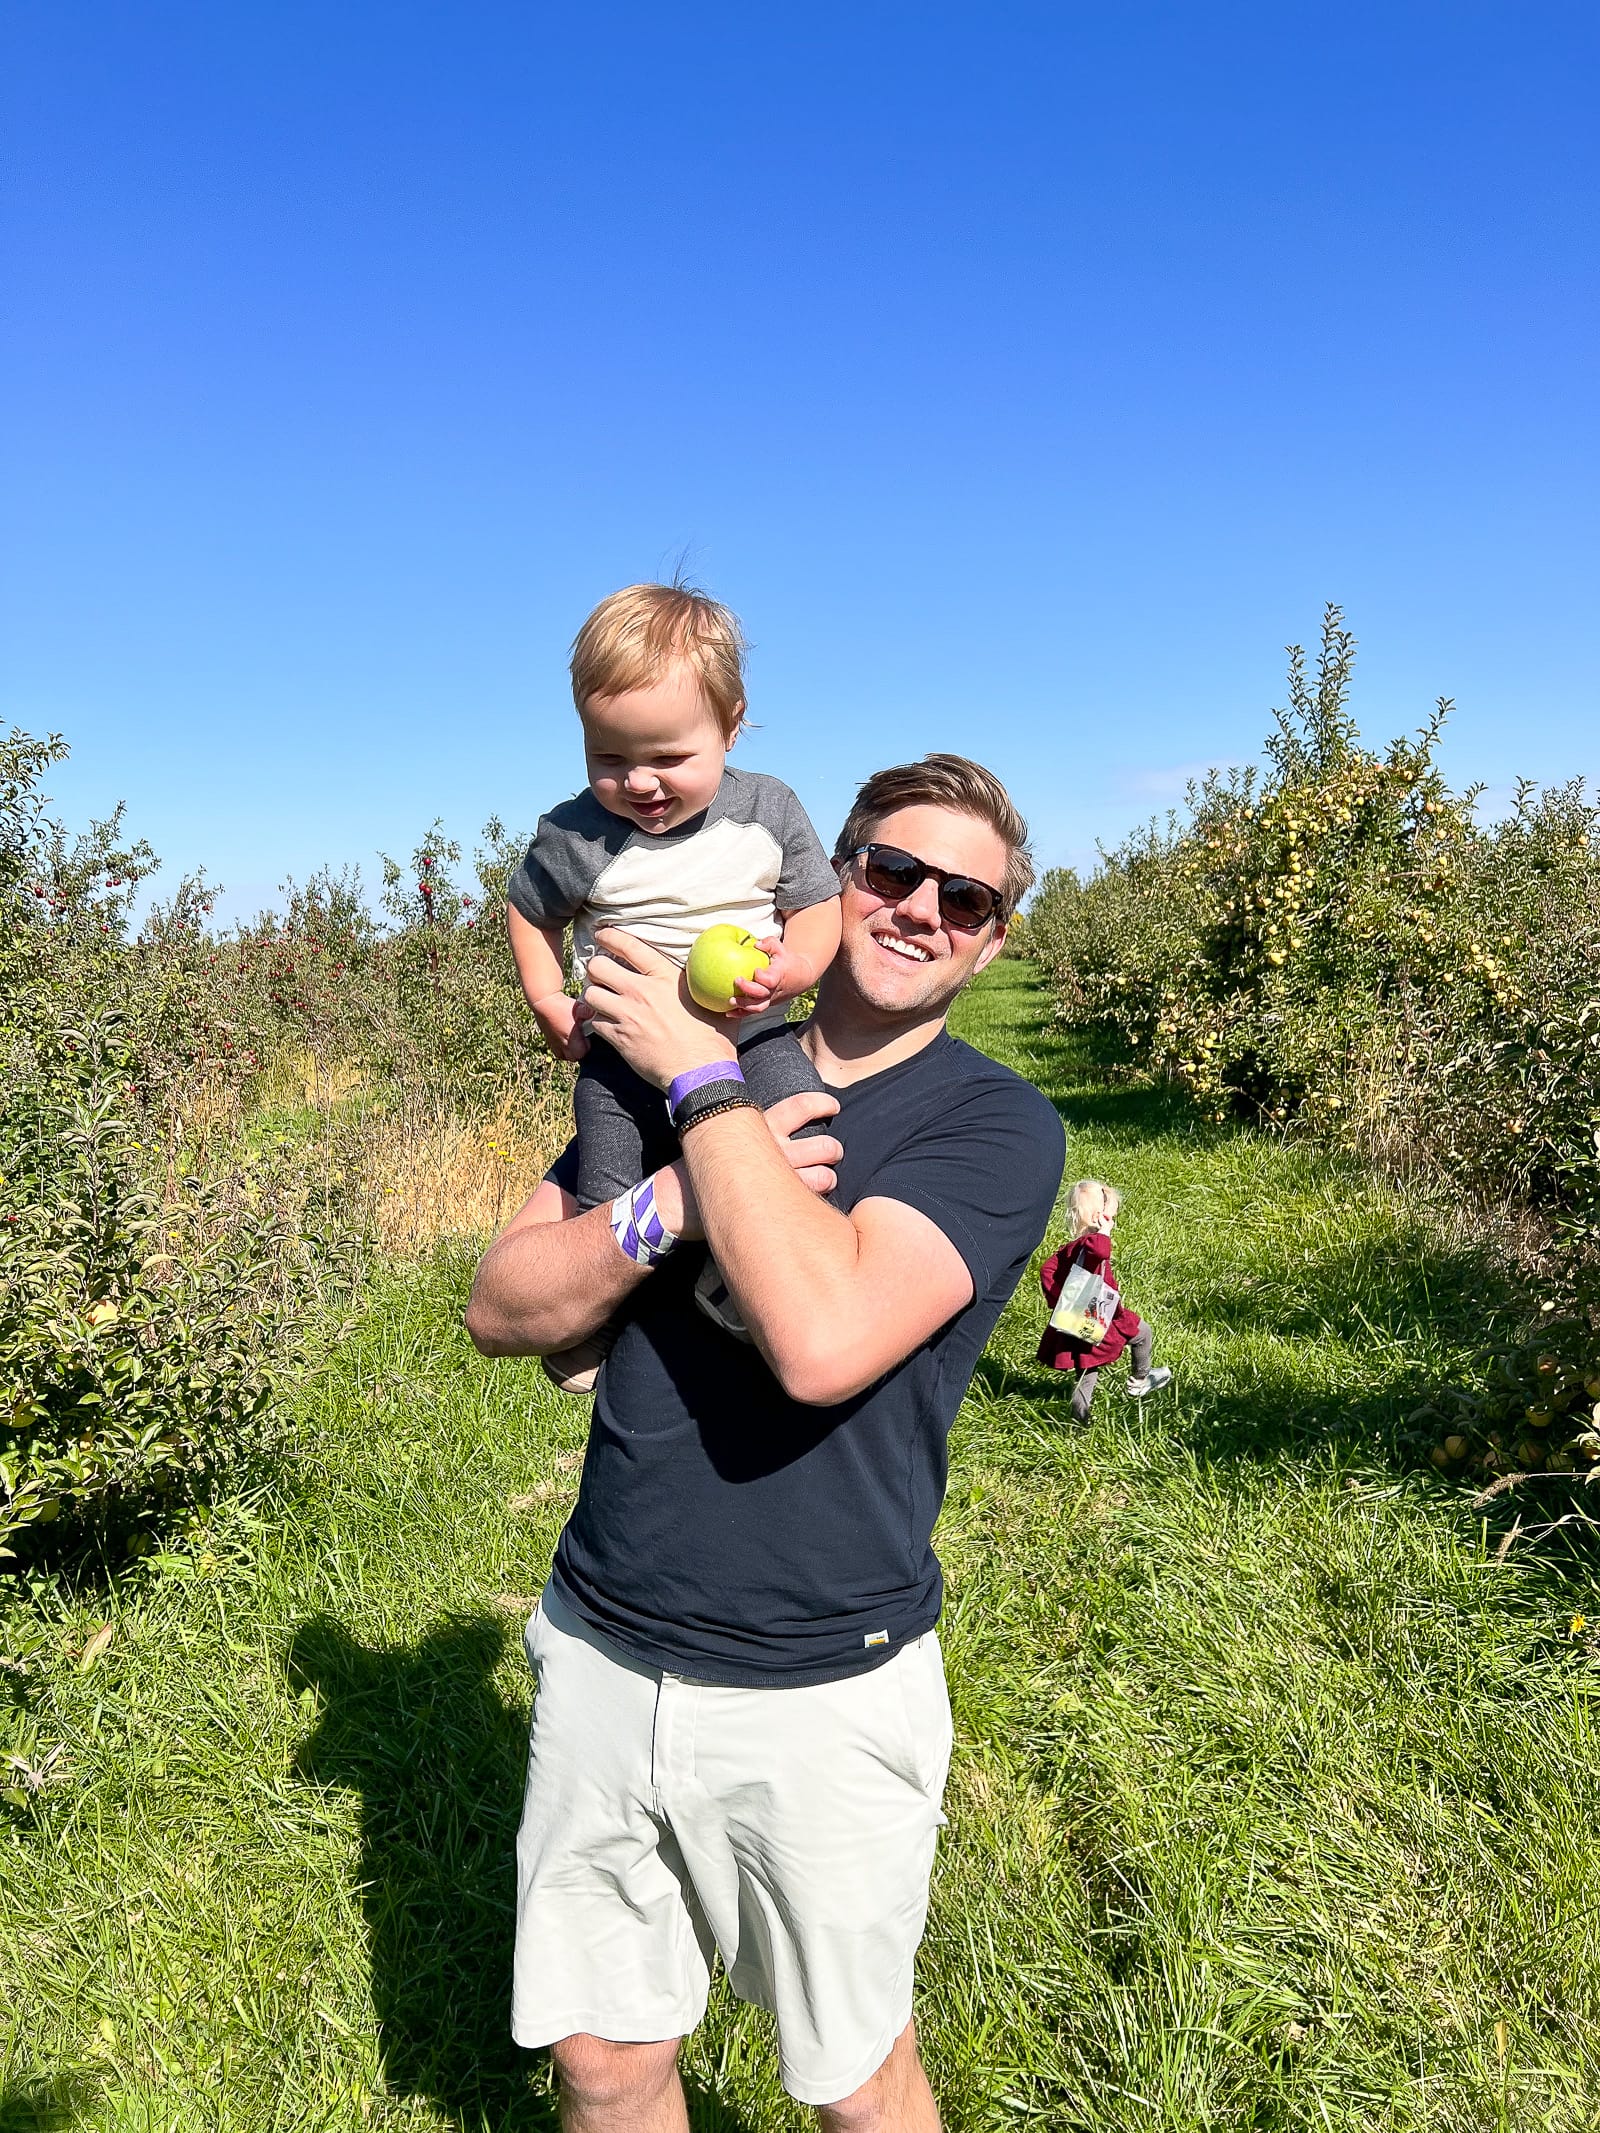 Our family apple picking